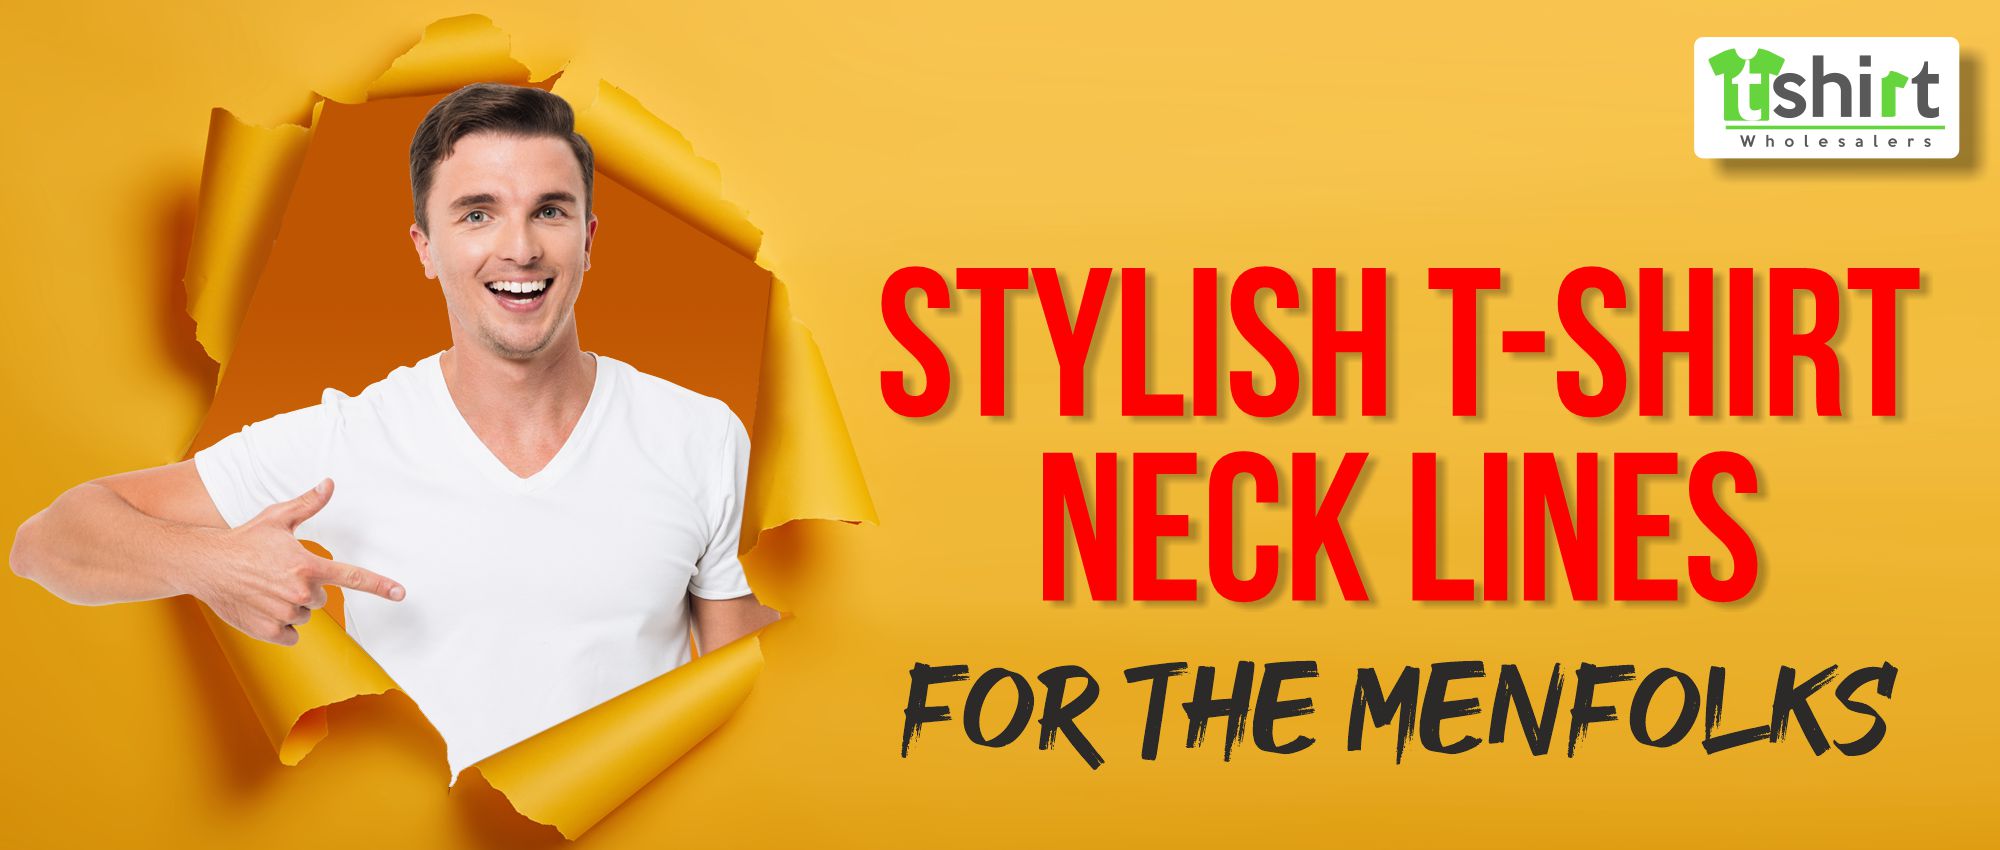 STYLISH T-SHIRT NECK LINES FOR THE MENFOLKS